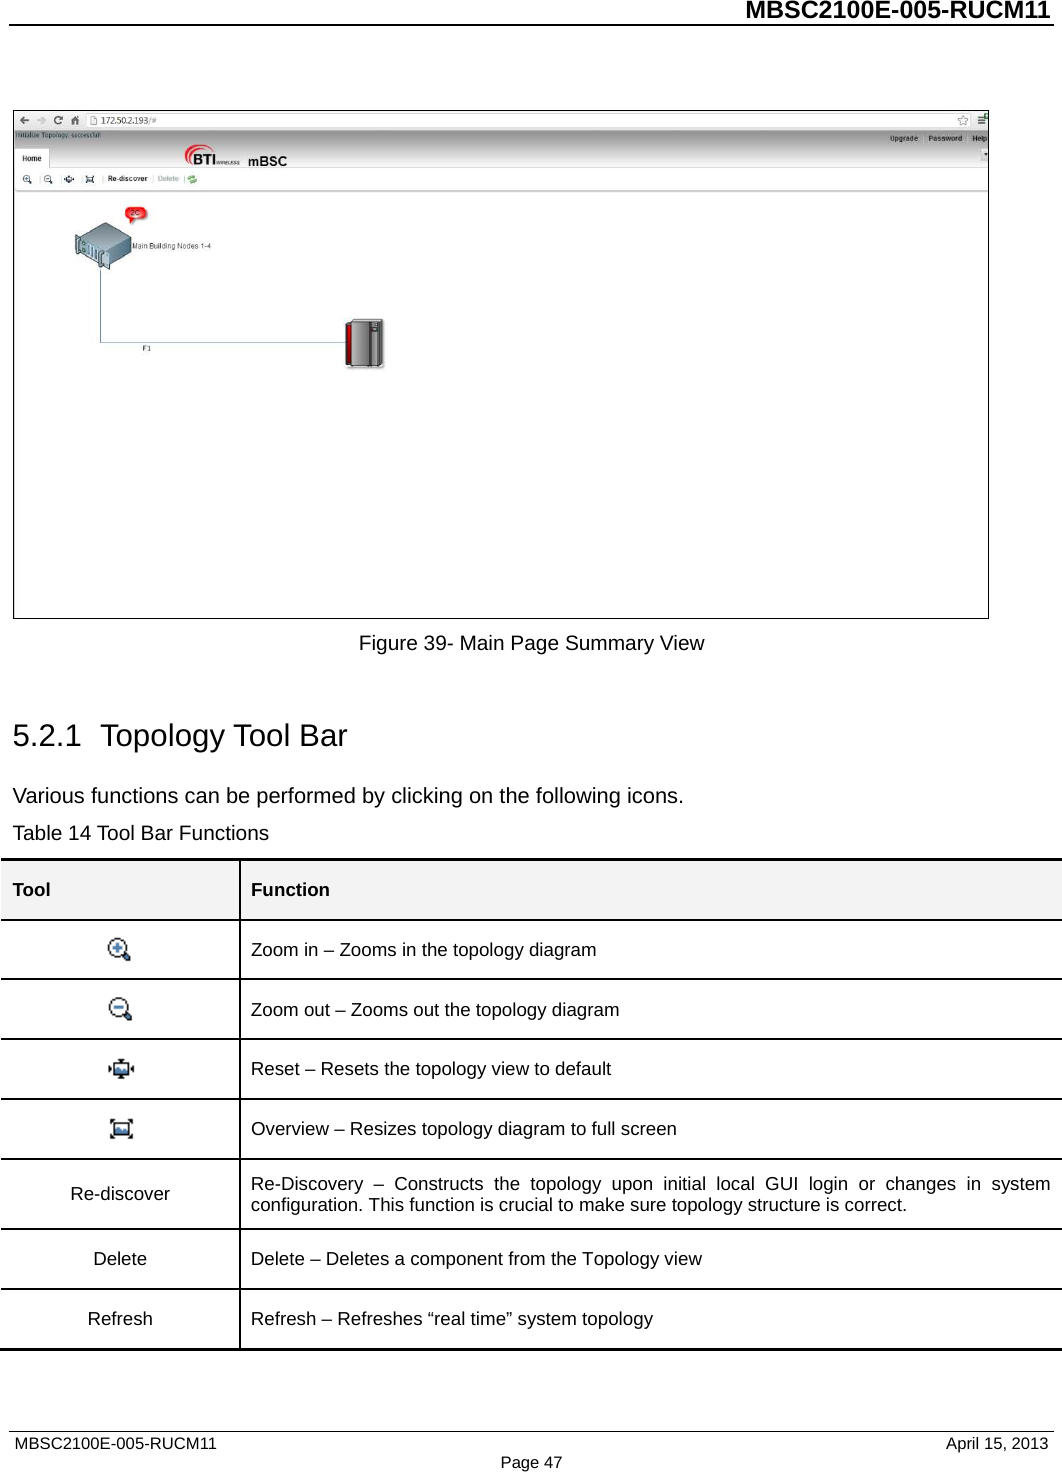          MBSC2100E-005-RUCM11    Figure 39- Main Page Summary View  5.2.1 Topology Tool Bar Various functions can be performed by clicking on the following icons. Table 14 Tool Bar Functions Tool Function  Zoom in – Zooms in the topology diagram  Zoom out – Zooms out the topology diagram  Reset – Resets the topology view to default  Overview – Resizes topology diagram to full screen   Re-discover Re-Discovery  –  Constructs the topology upon initial local GUI login or changes in system configuration. This function is crucial to make sure topology structure is correct. Delete Delete – Deletes a component from the Topology view Refresh Refresh – Refreshes “real time” system topology  MBSC2100E-005-RUCM11                                April 15, 2013 Page 47 